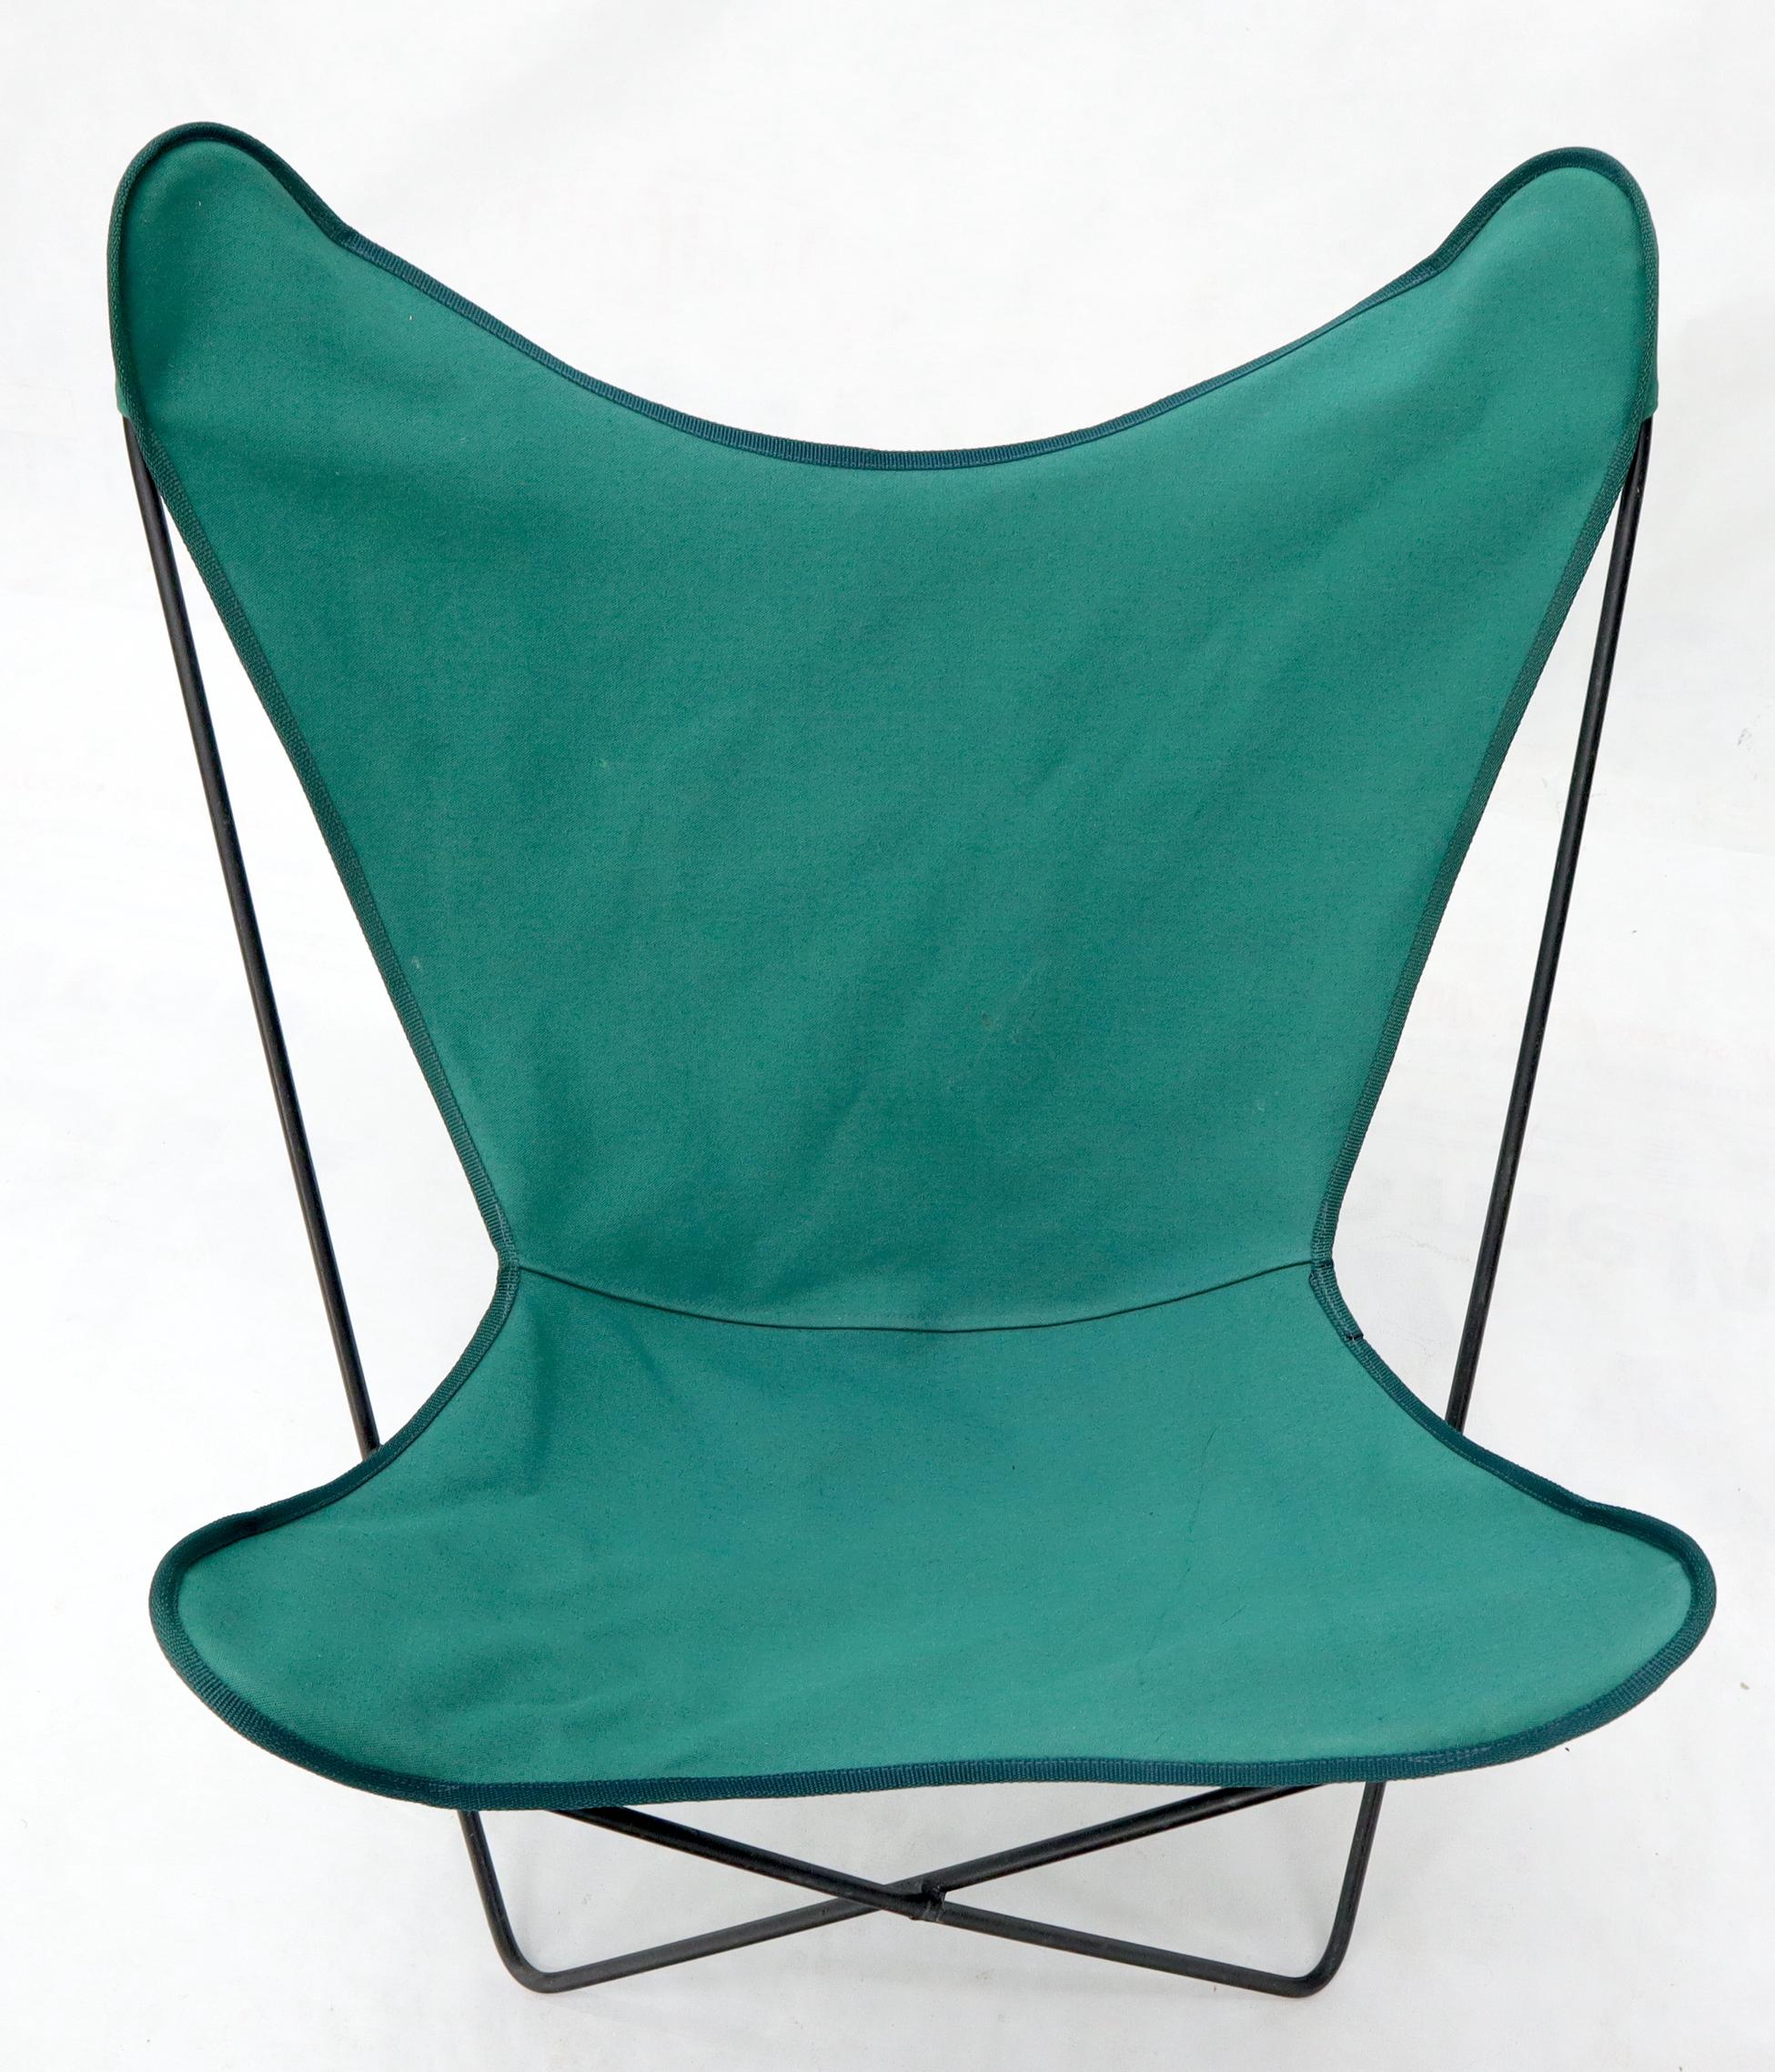 Upholstery Set of 4 Butterfly Sling Chairs